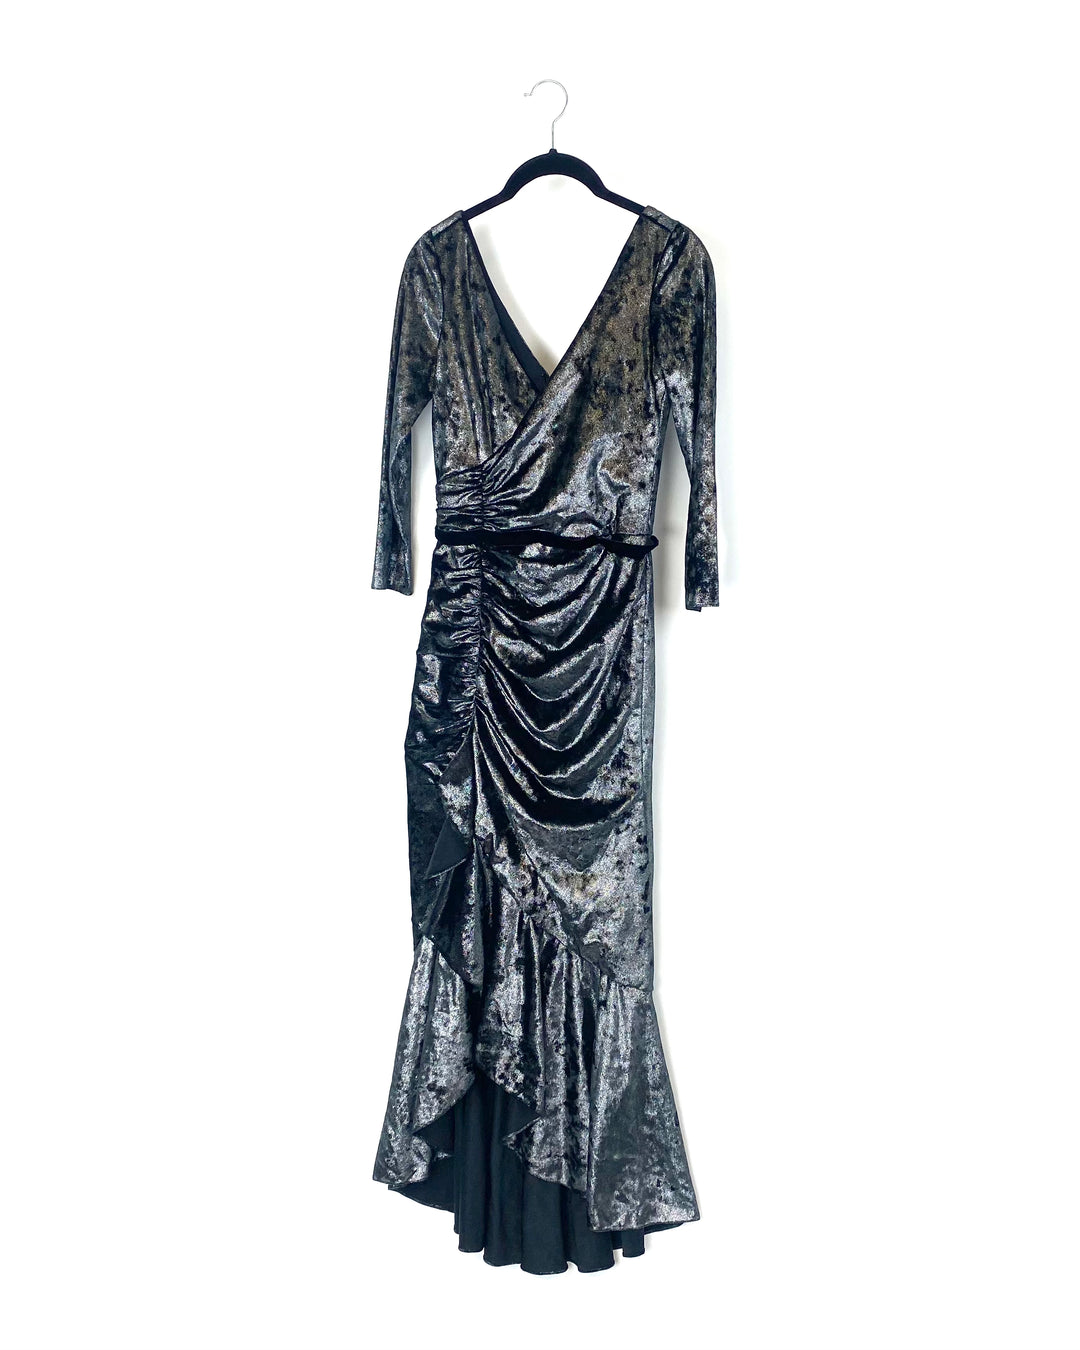 Black and Silver Metallic Velour Gown - Extra Small